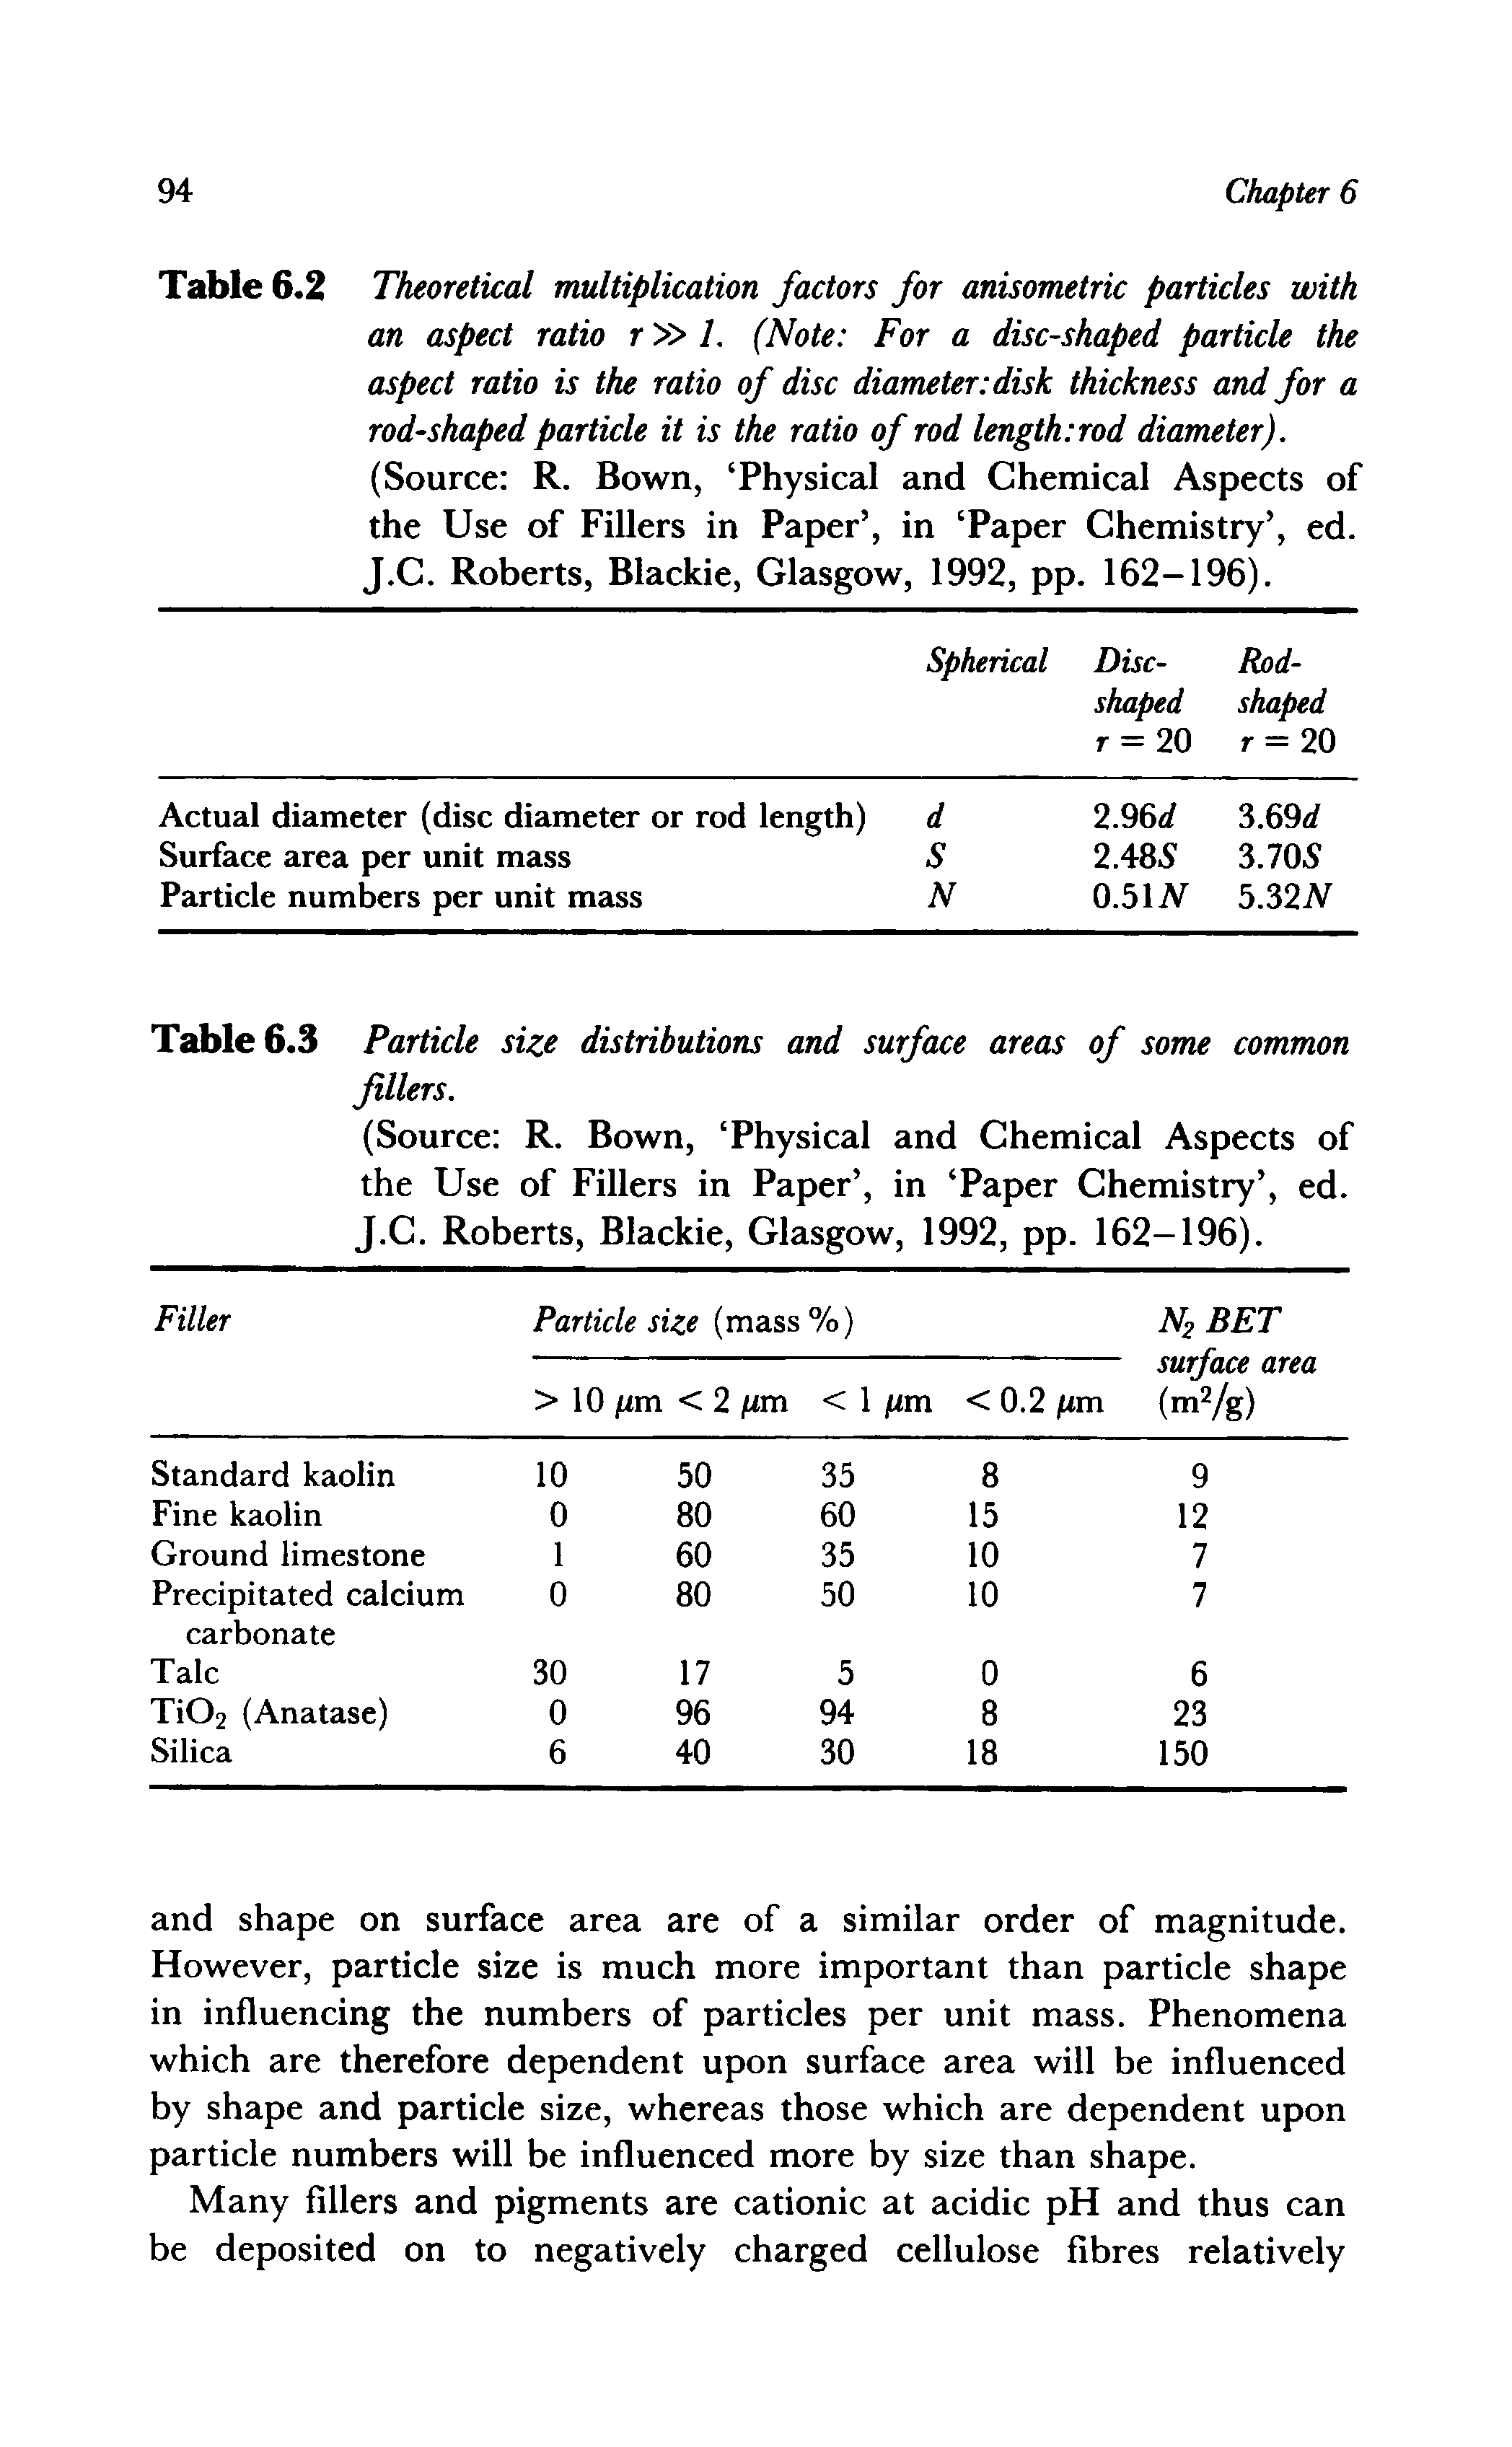 Table 6.2 Theoretical multiplication factors for anisometric particles with an aspect ratio r 1. (Note For a disc-shaped particle the aspect ratio is the ratio of disc diameter disk thickness and for a rod-shaped particle it is the ratio of rod length rod diameter). (Source R. Bown, Physical and Chemical Aspects of the Use of Fillers in Paper , in Paper Chemistry , ed. J.C. Roberts, Blackie, Glasgow, 1992, pp. 162-196).